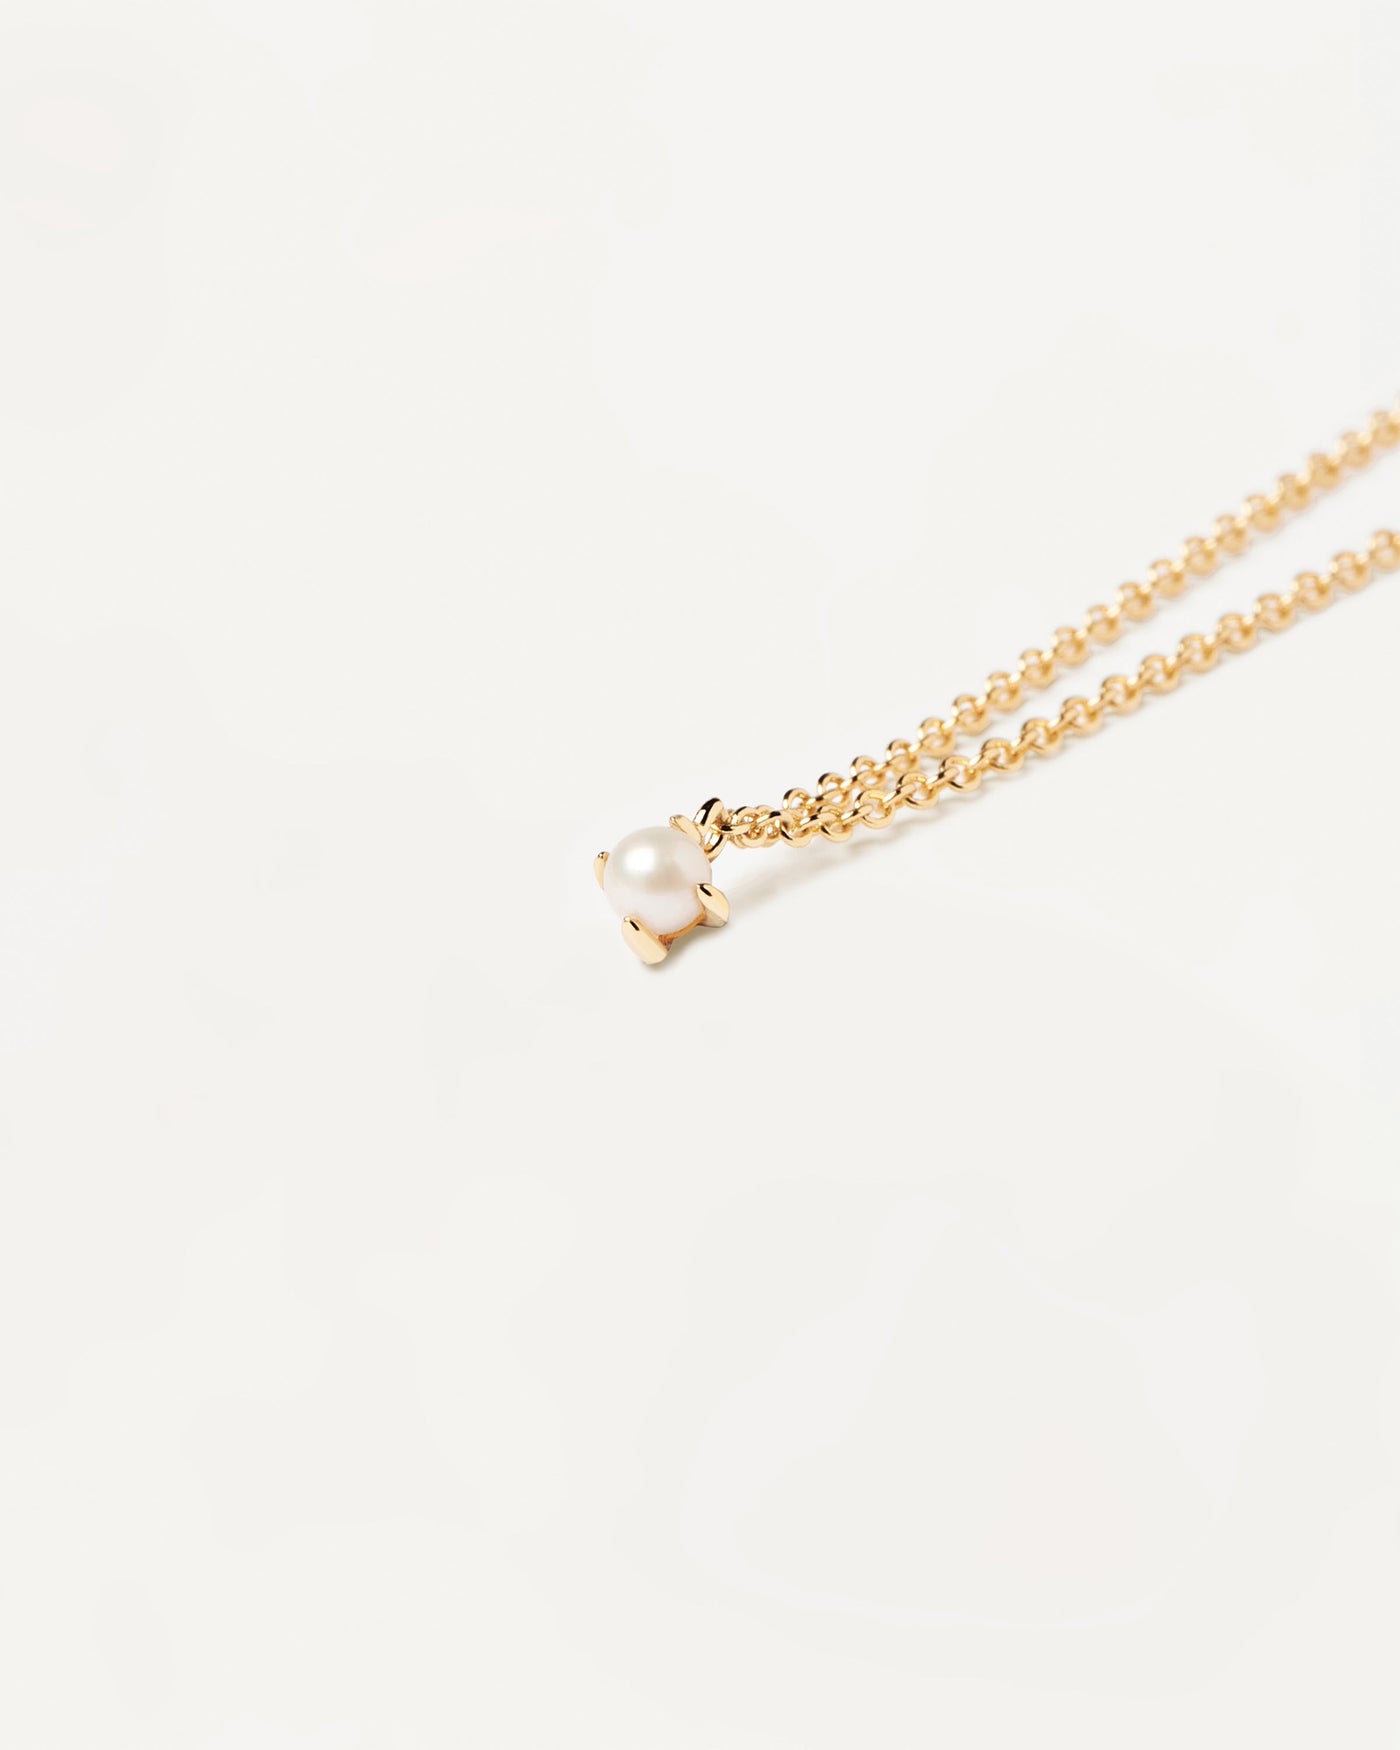 2023 Selection | Solitary Pearl Necklace. 18k gold plated chain necklace with a single natural pearl set on prongs. Get the latest arrival from PDPAOLA. Place your order safely and get this Best Seller. Free Shipping.